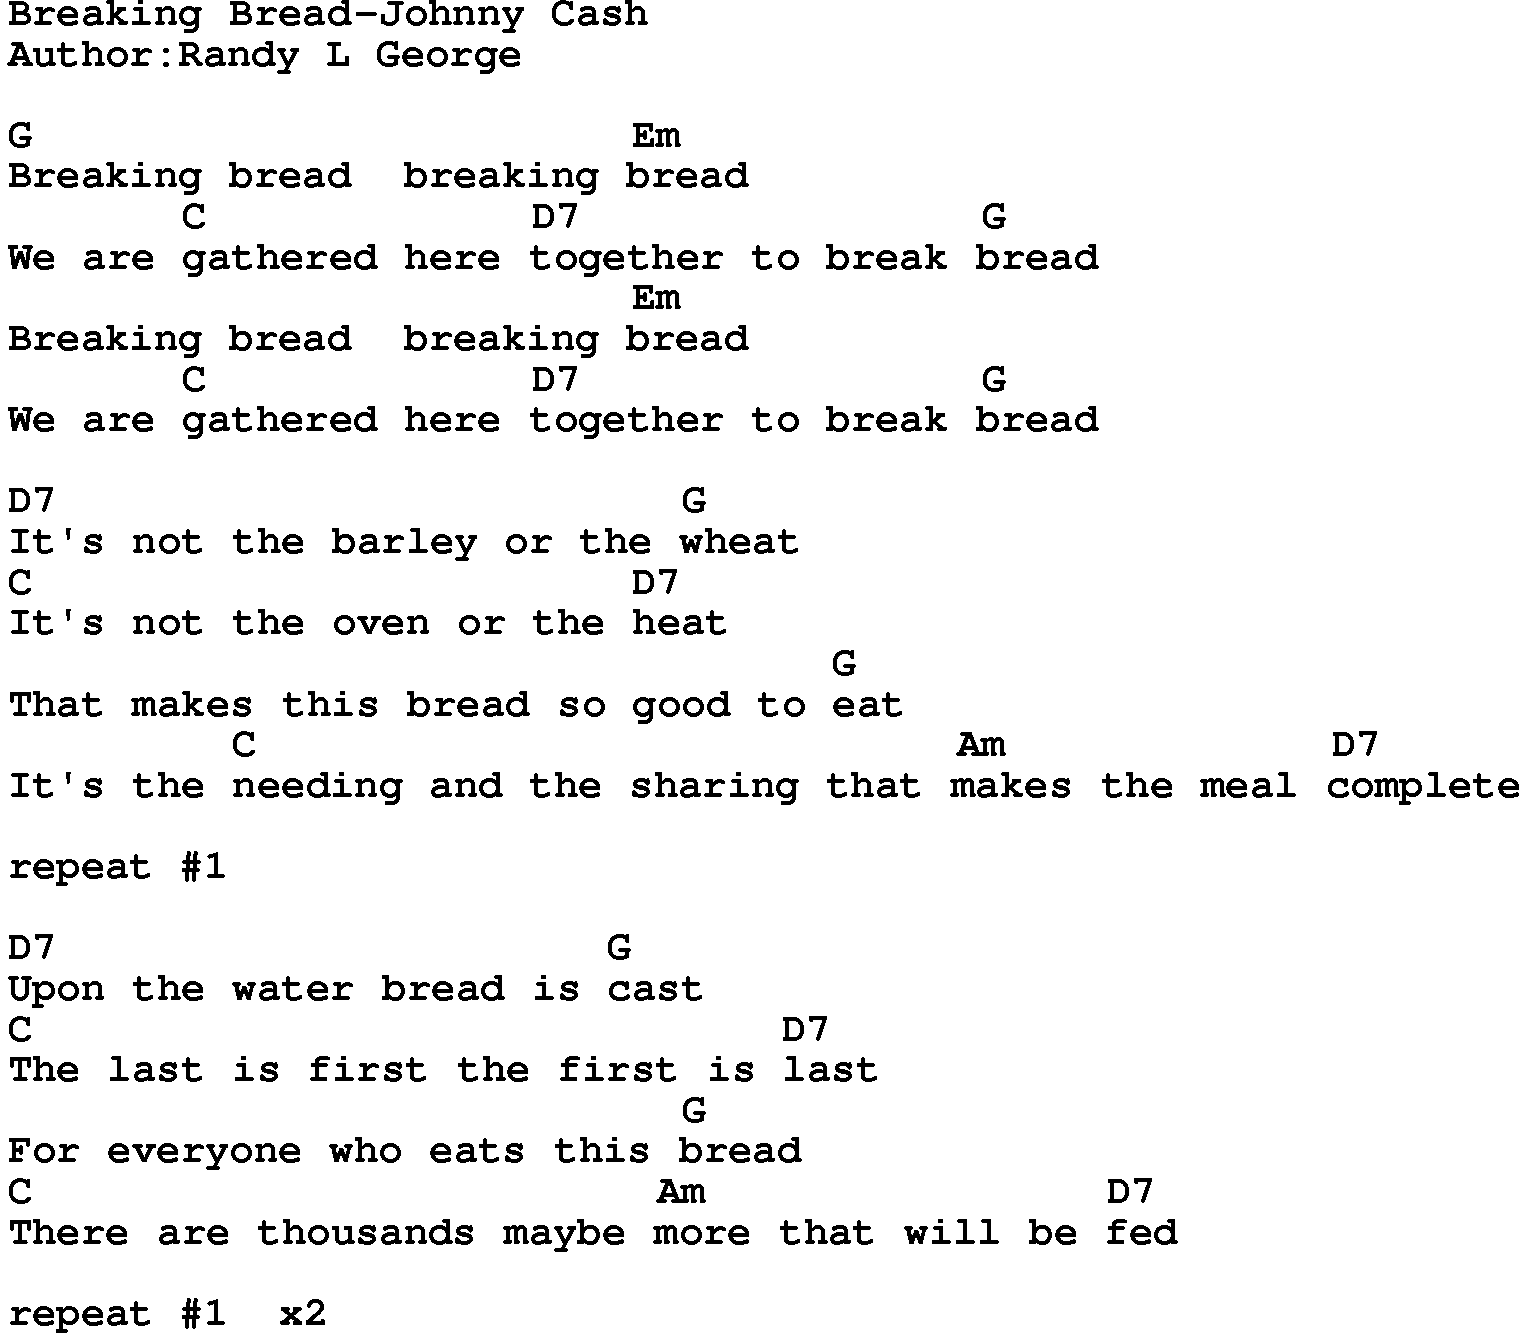 Country music song: Breaking Bread-Johnny Cash lyrics and chords